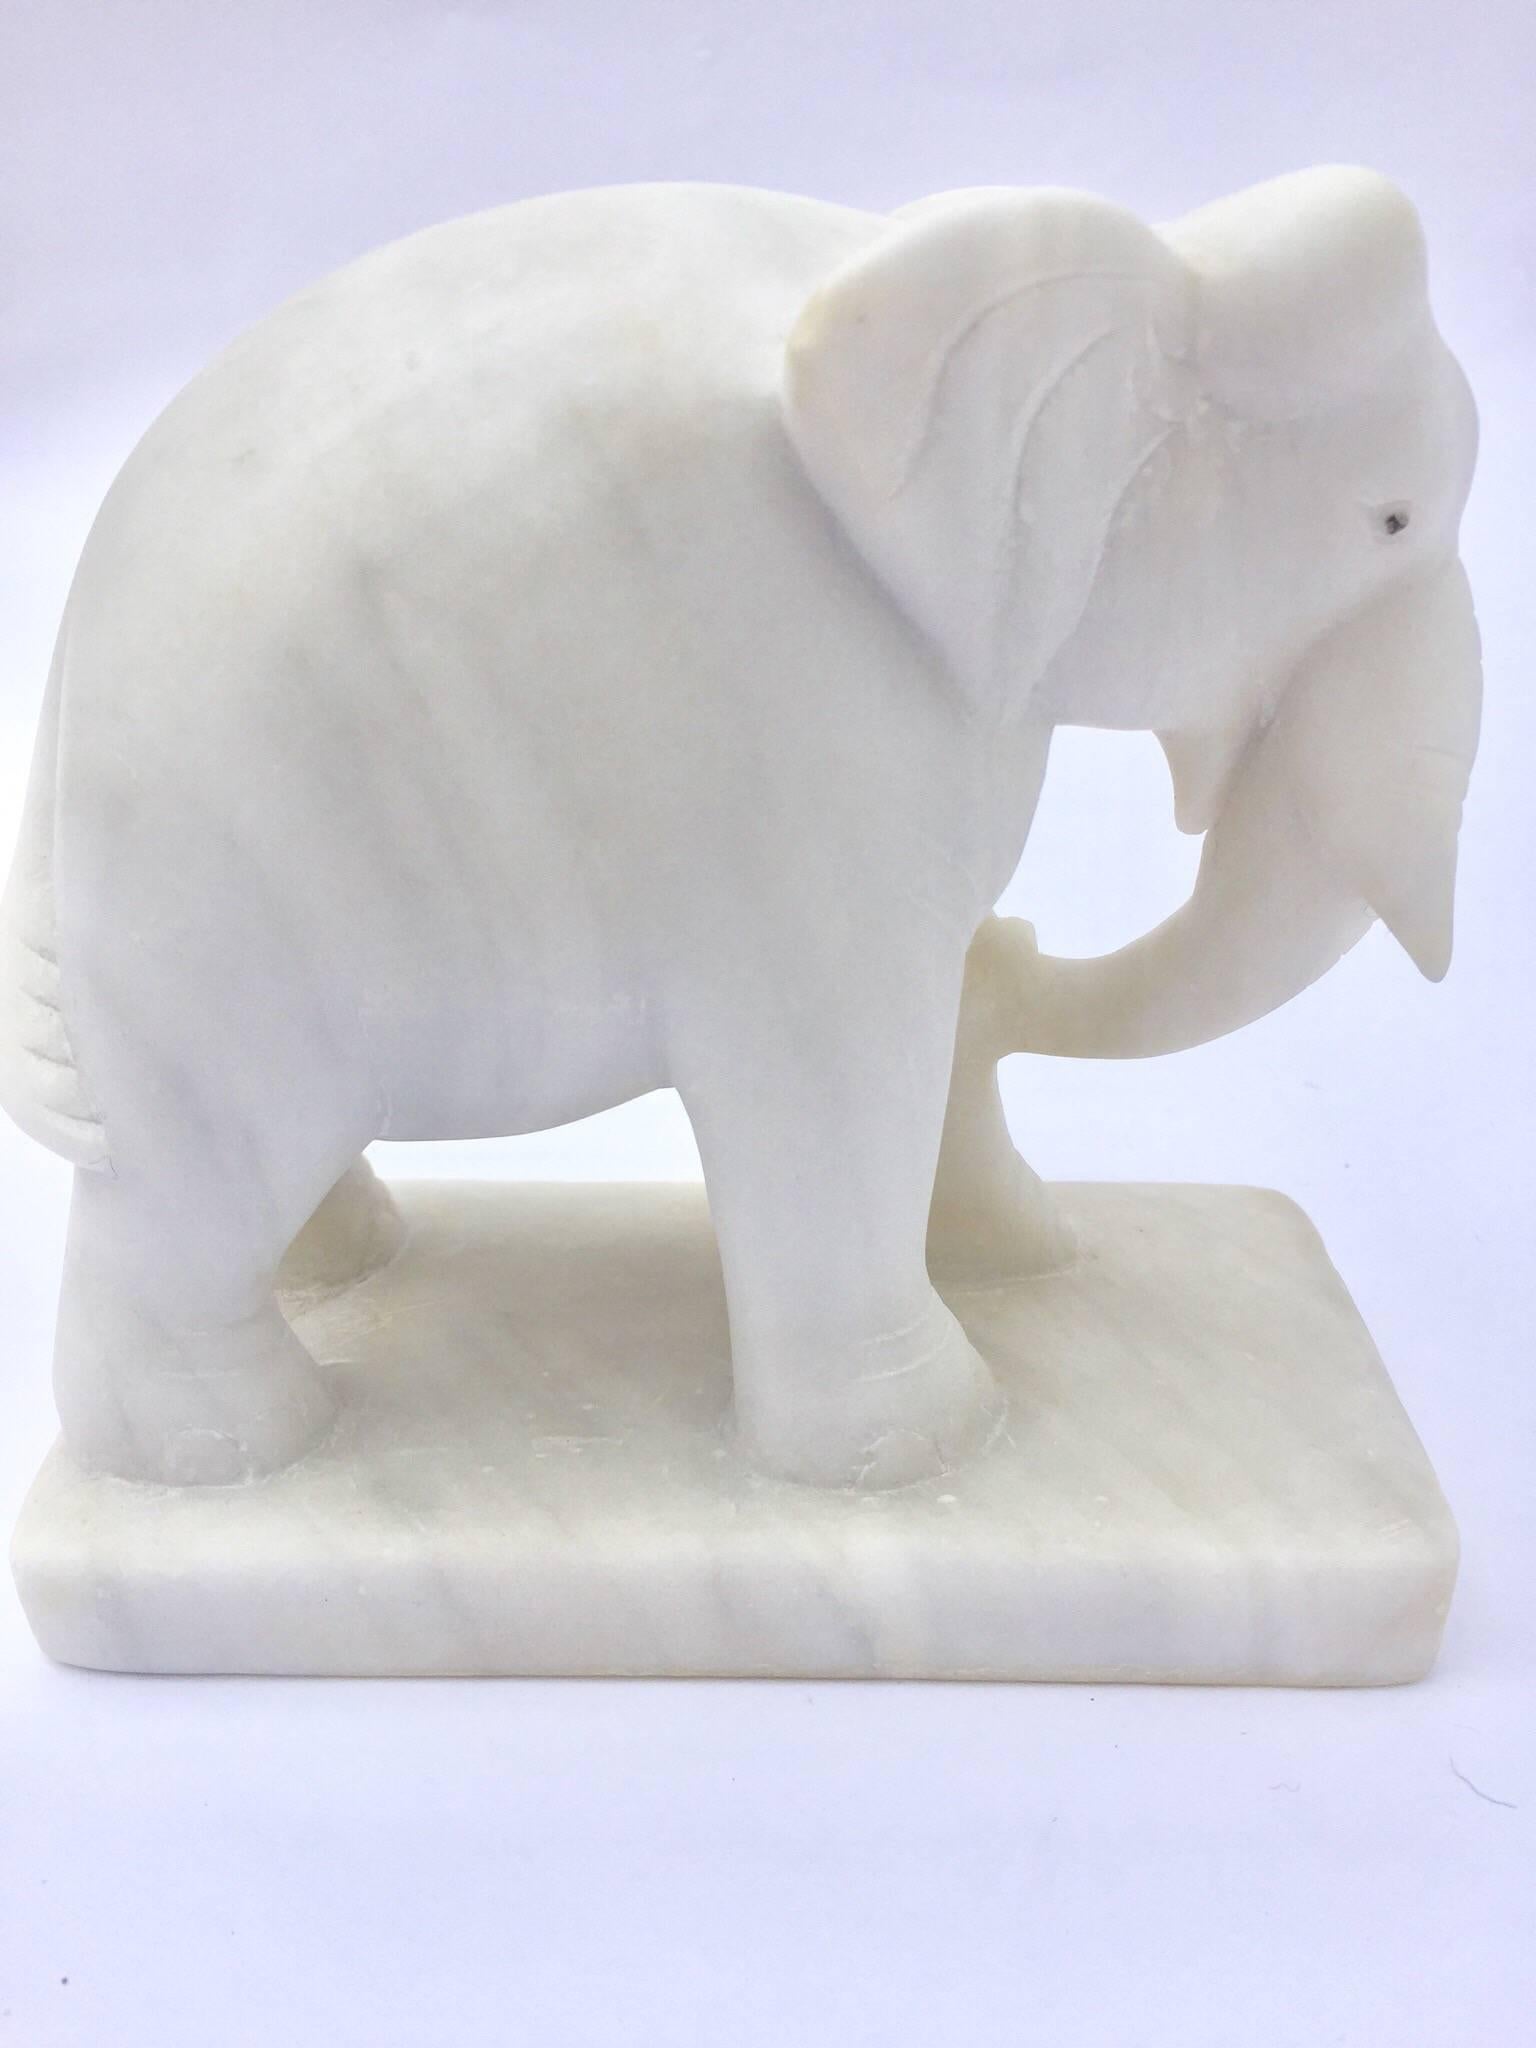 Anglo Raj Hand-Carved White Elephant Marble Sculpture Jaipur, Rajasthan India